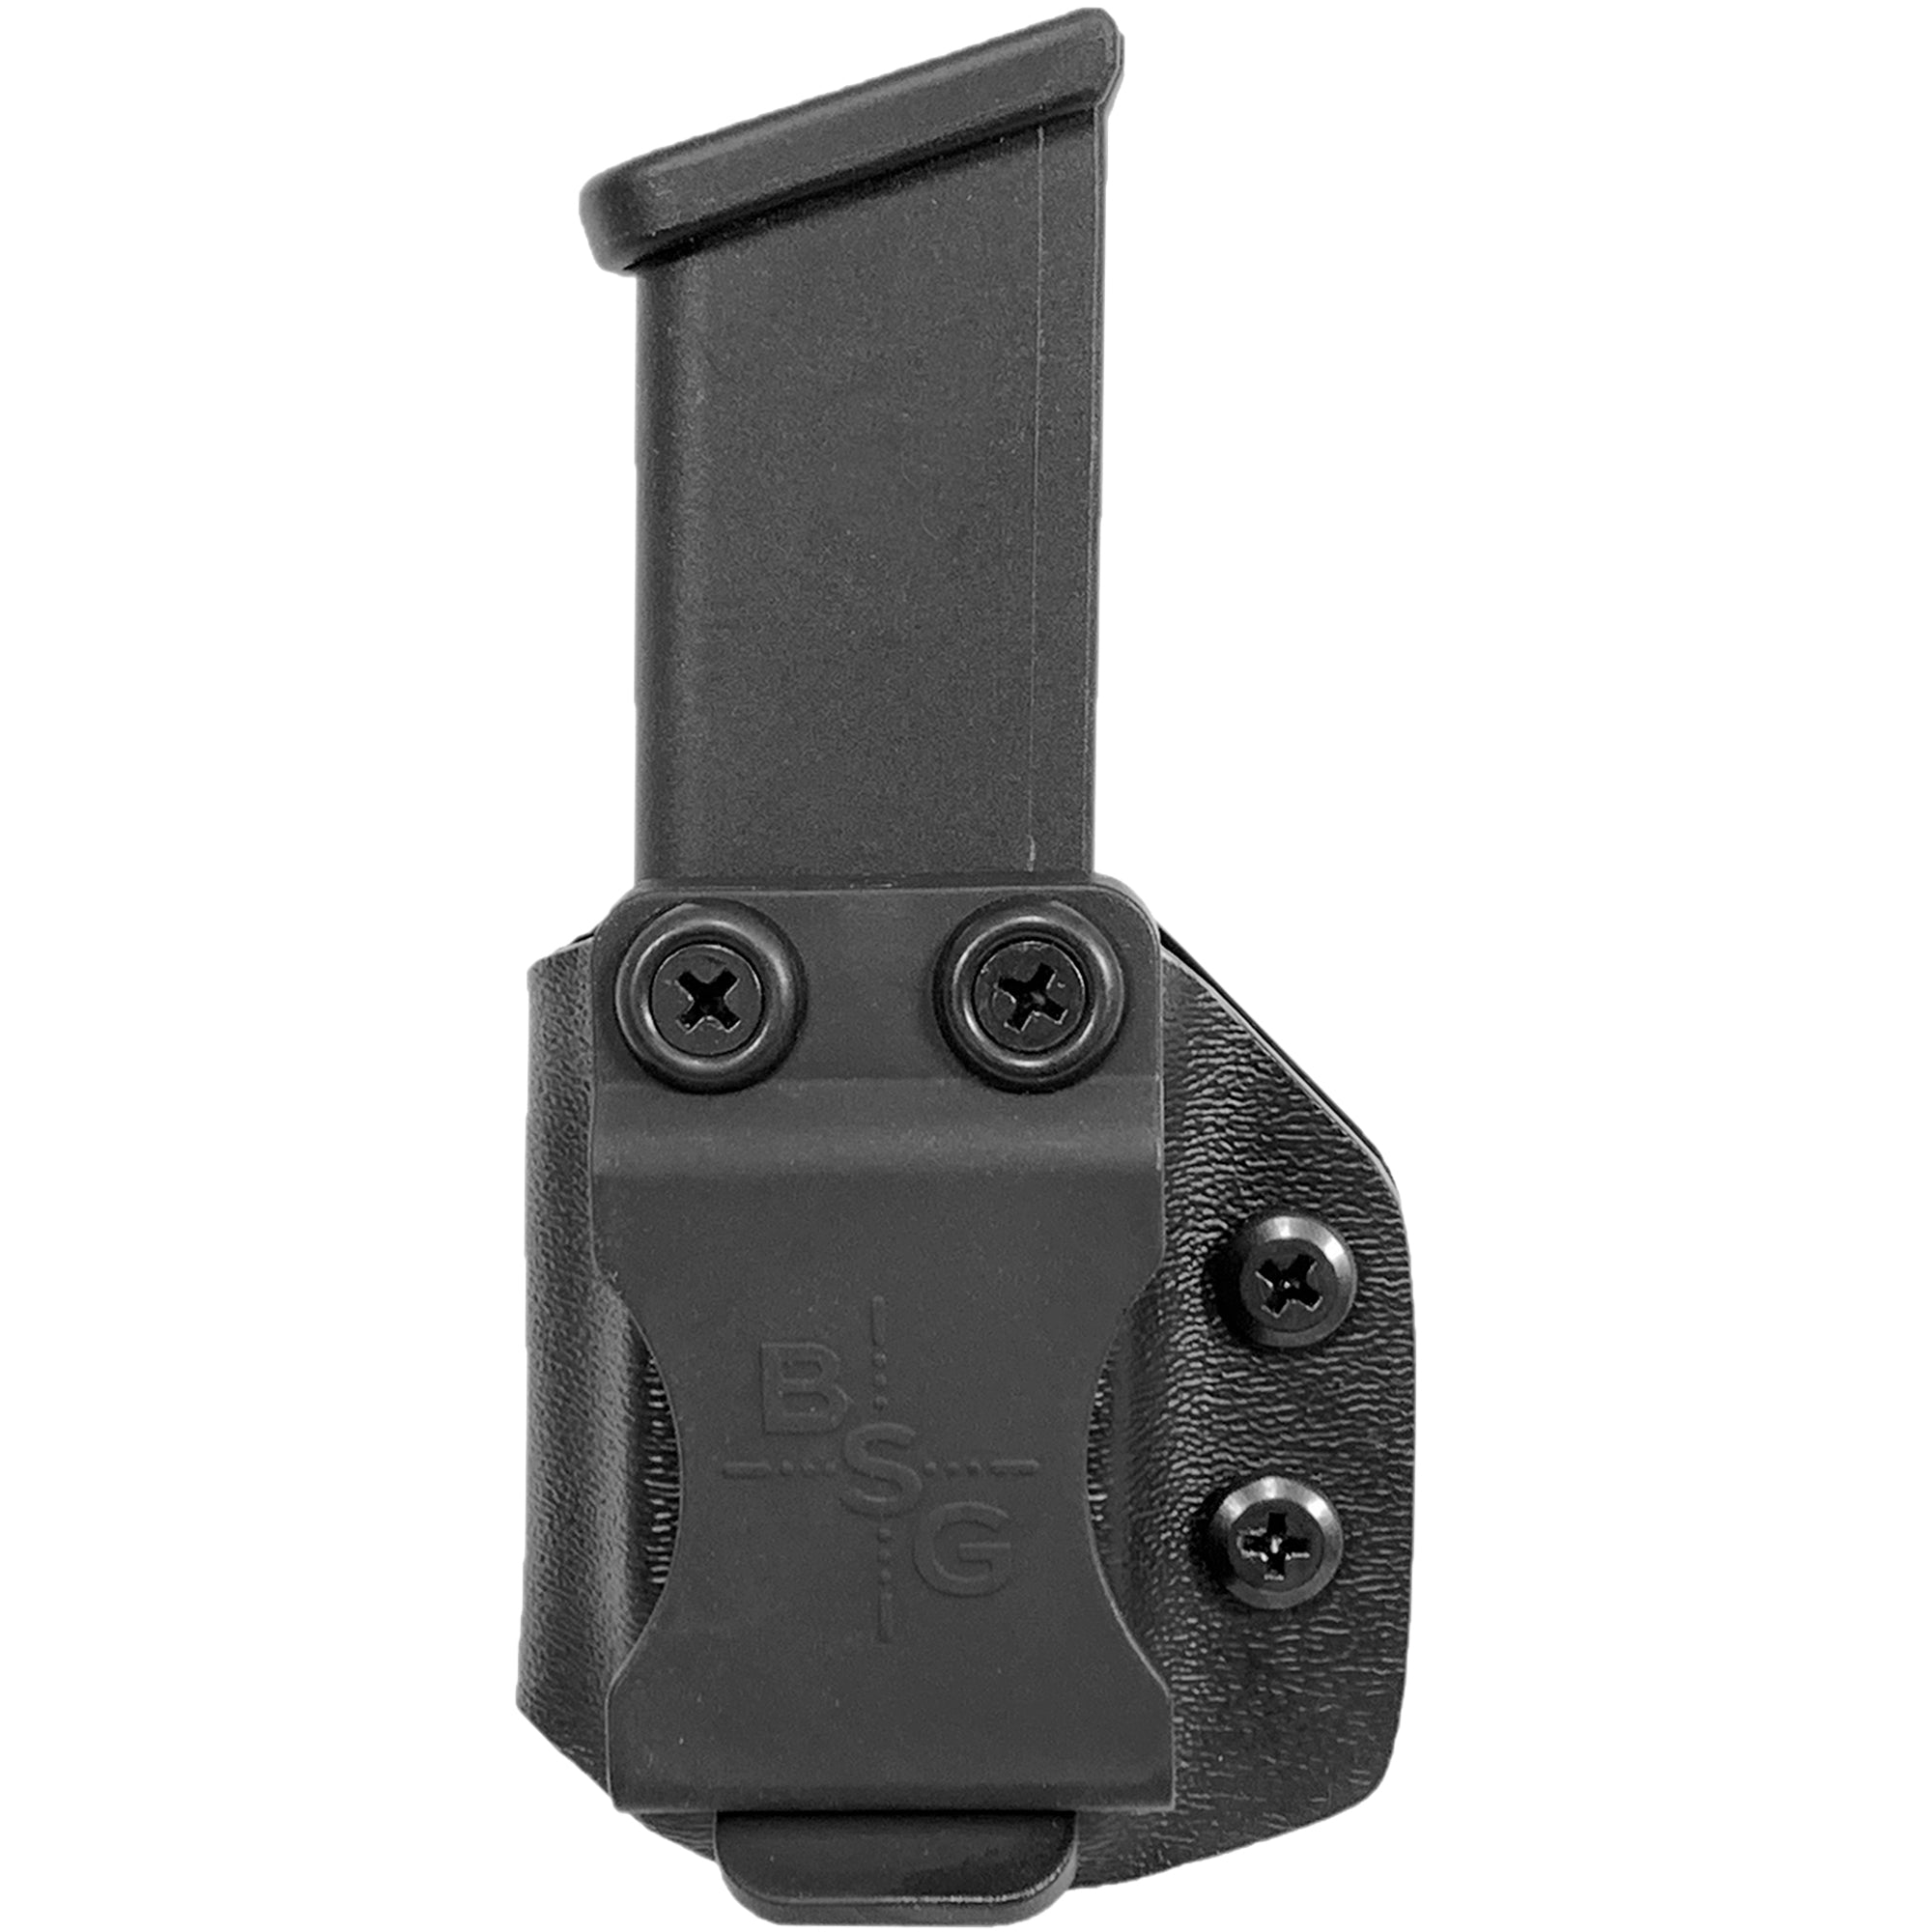 Special Ops IWB Belt Clip Holster With Sewn-On Mag Pouch with Kydex Insert  (Fits Glock 17, 19, 26, 30)